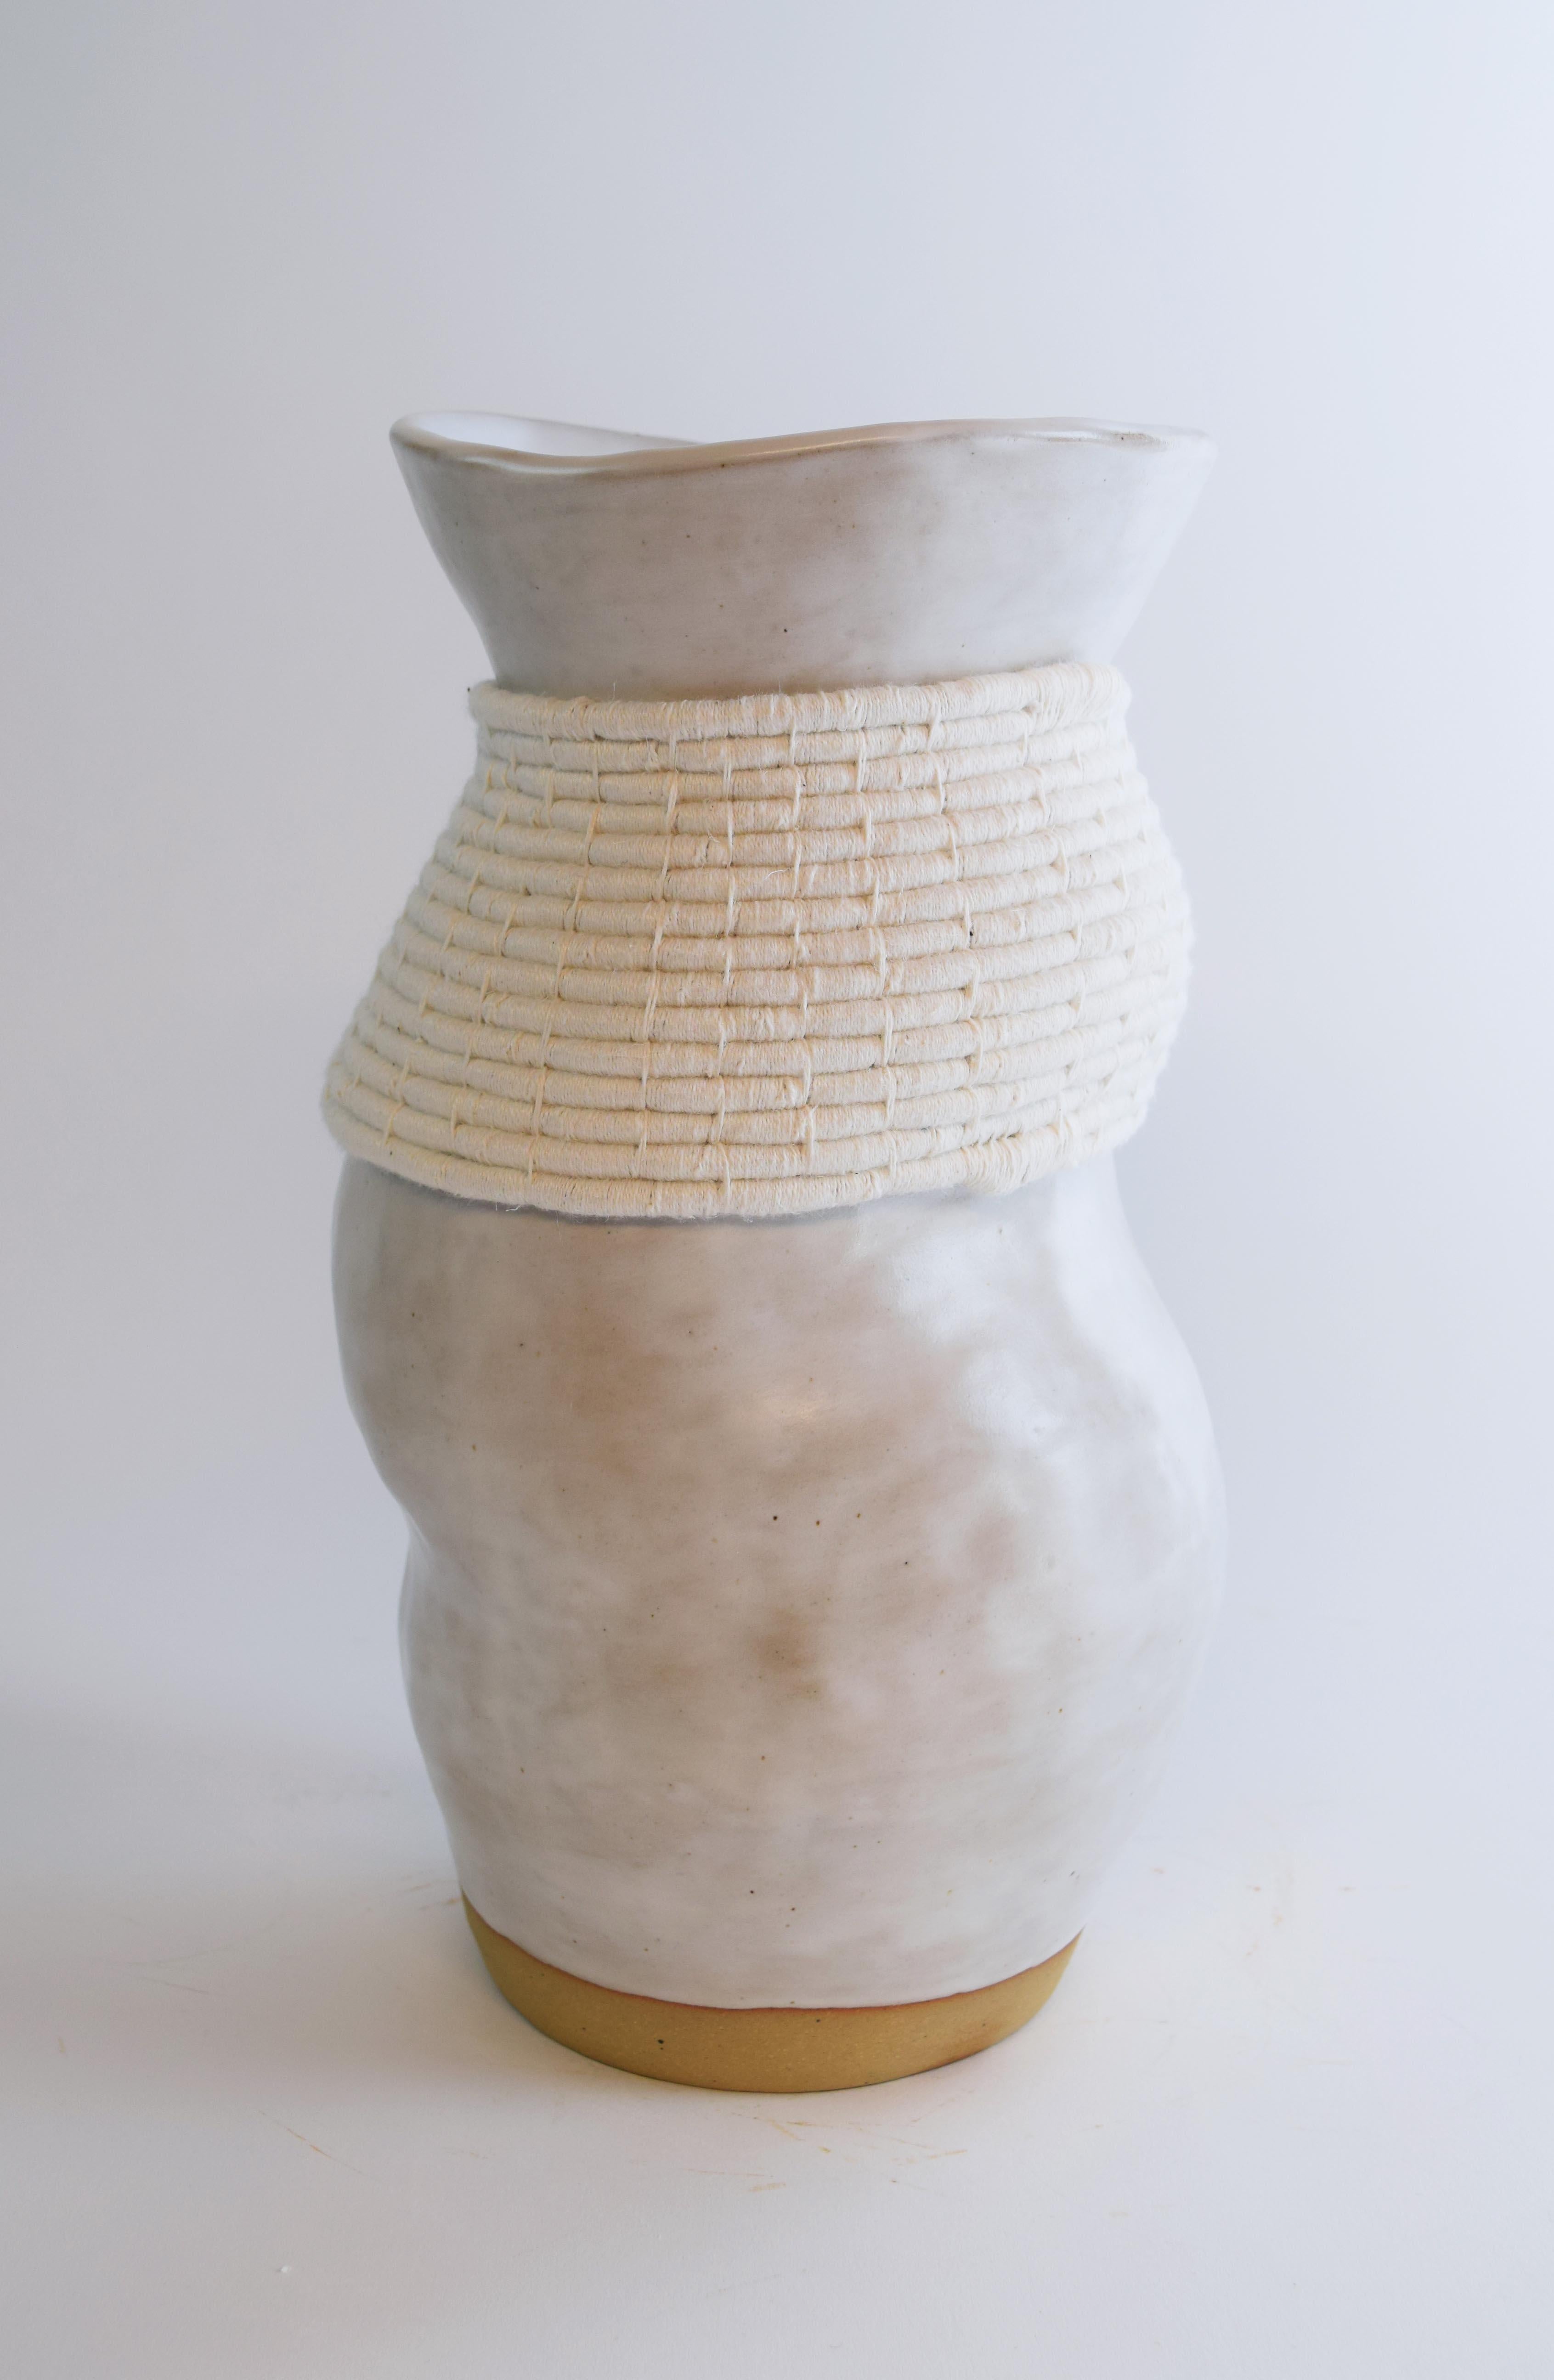 Hand-Crafted One of a Kind Asymmetrical Ceramic Vase #775, White Glaze, Woven White Cotton